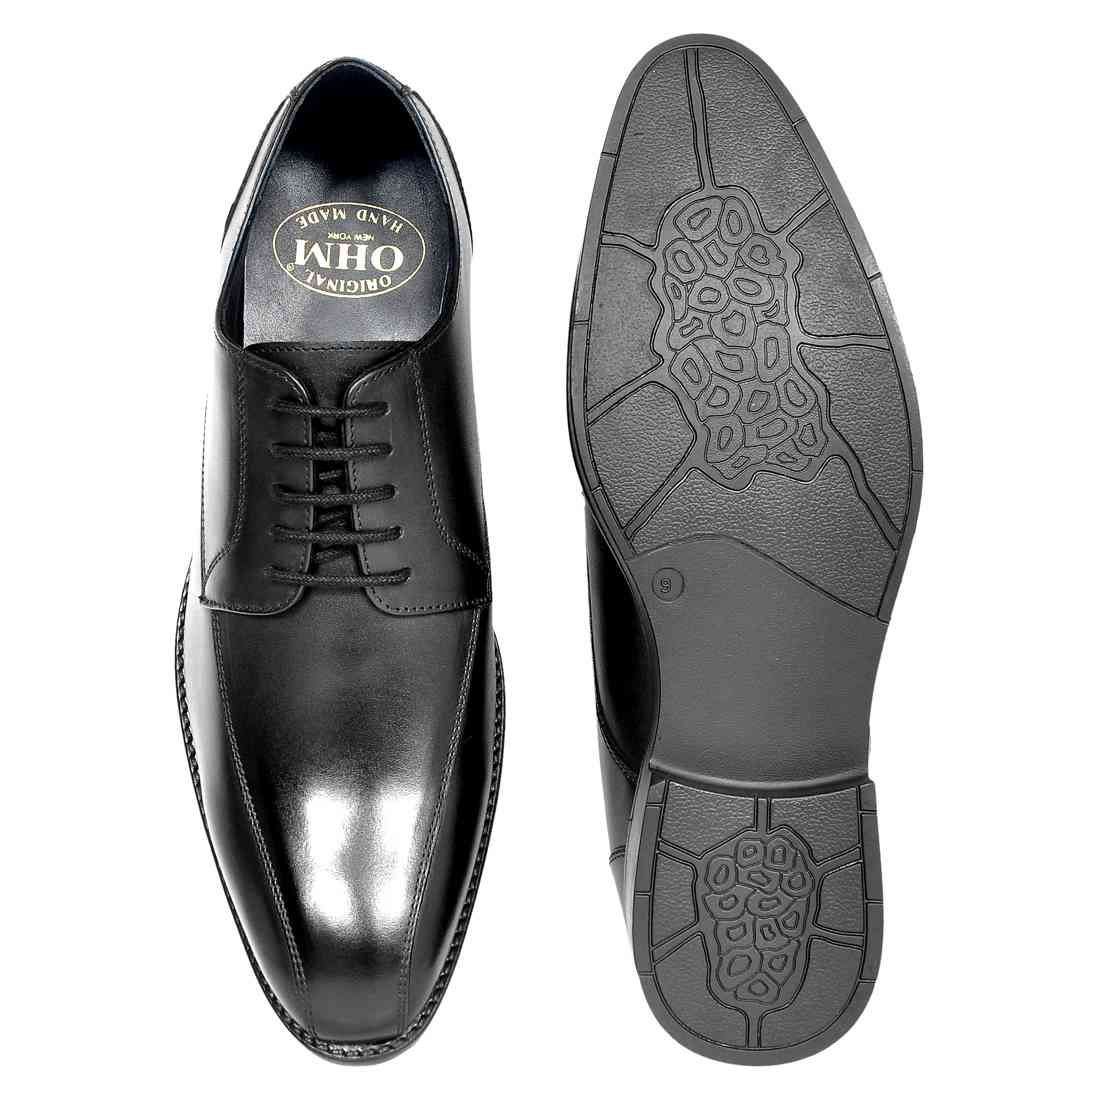 OHM New York Double Stitched Corporate Leather Shoes